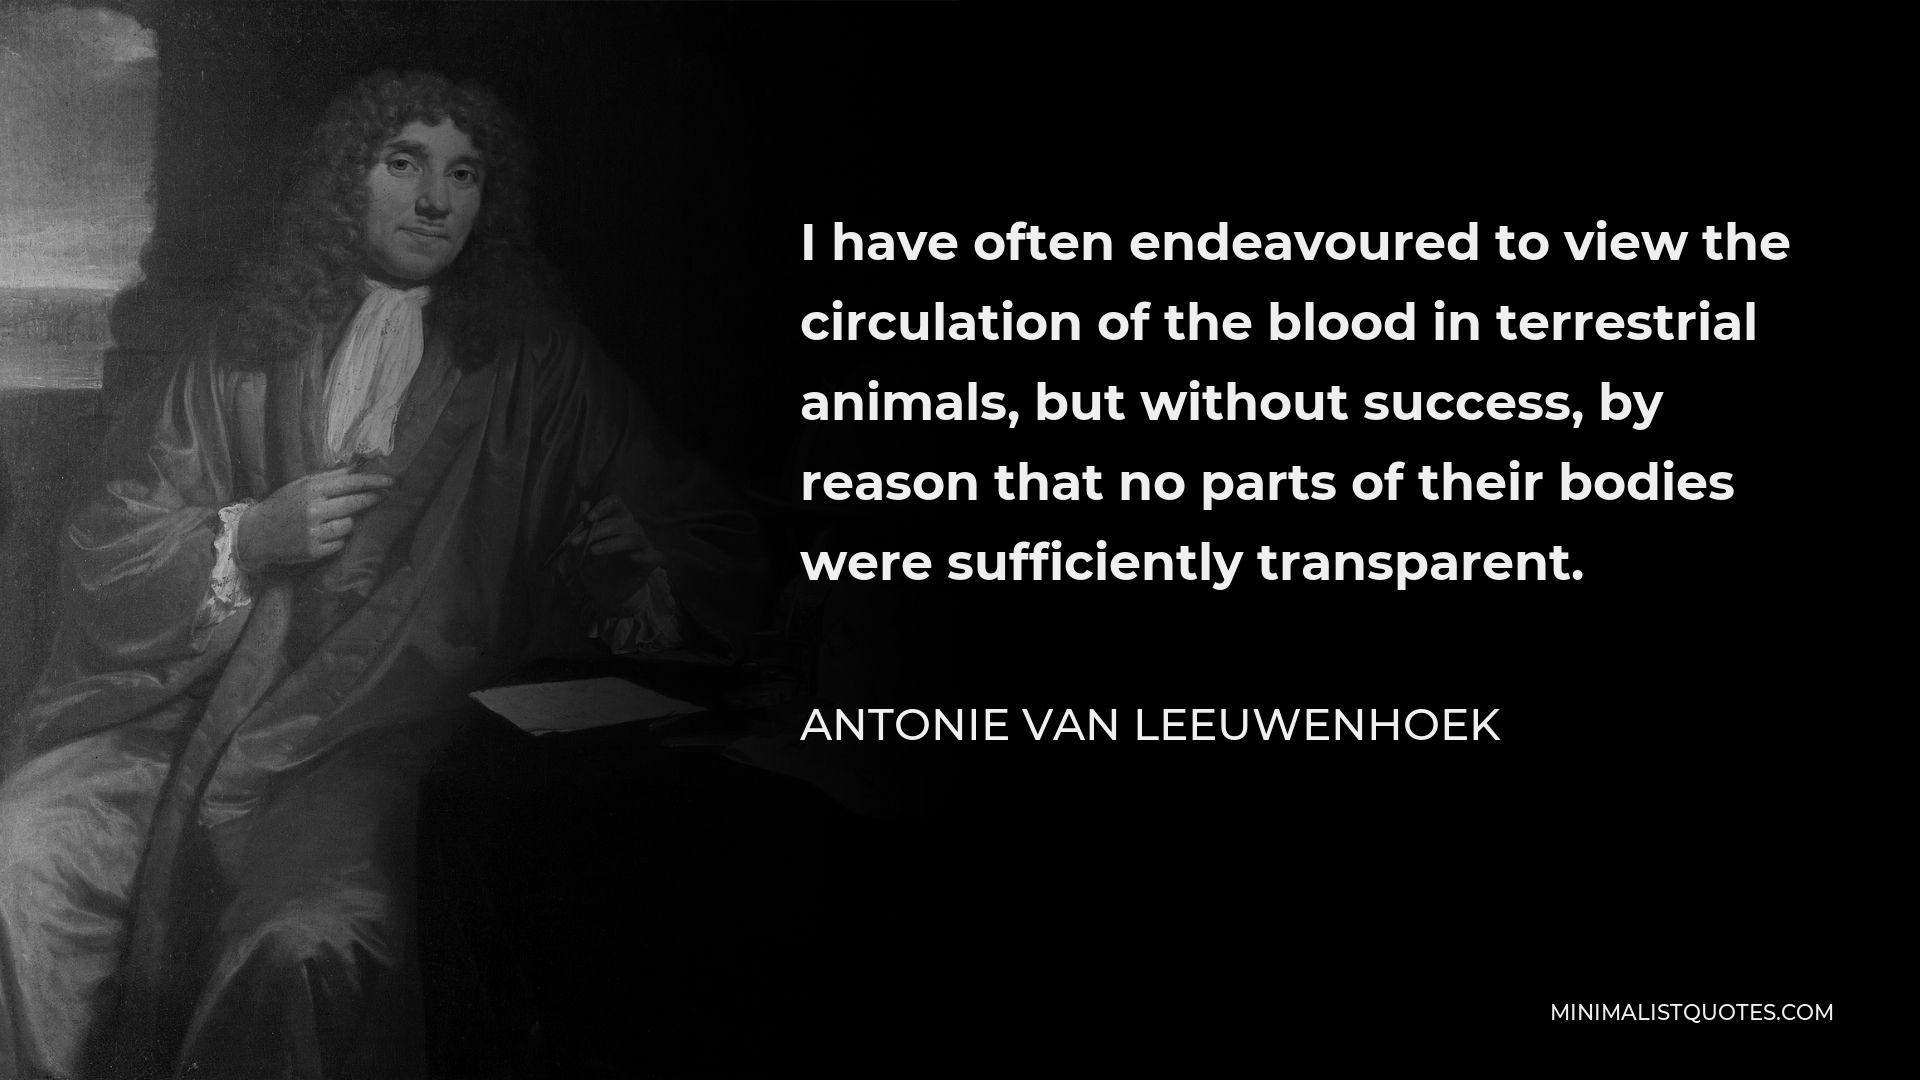 Antonie van Leeuwenhoek Quote - I have often endeavoured to view the circulation of the blood in terrestrial animals, but without success, by reason that no parts of their bodies were sufficiently transparent.